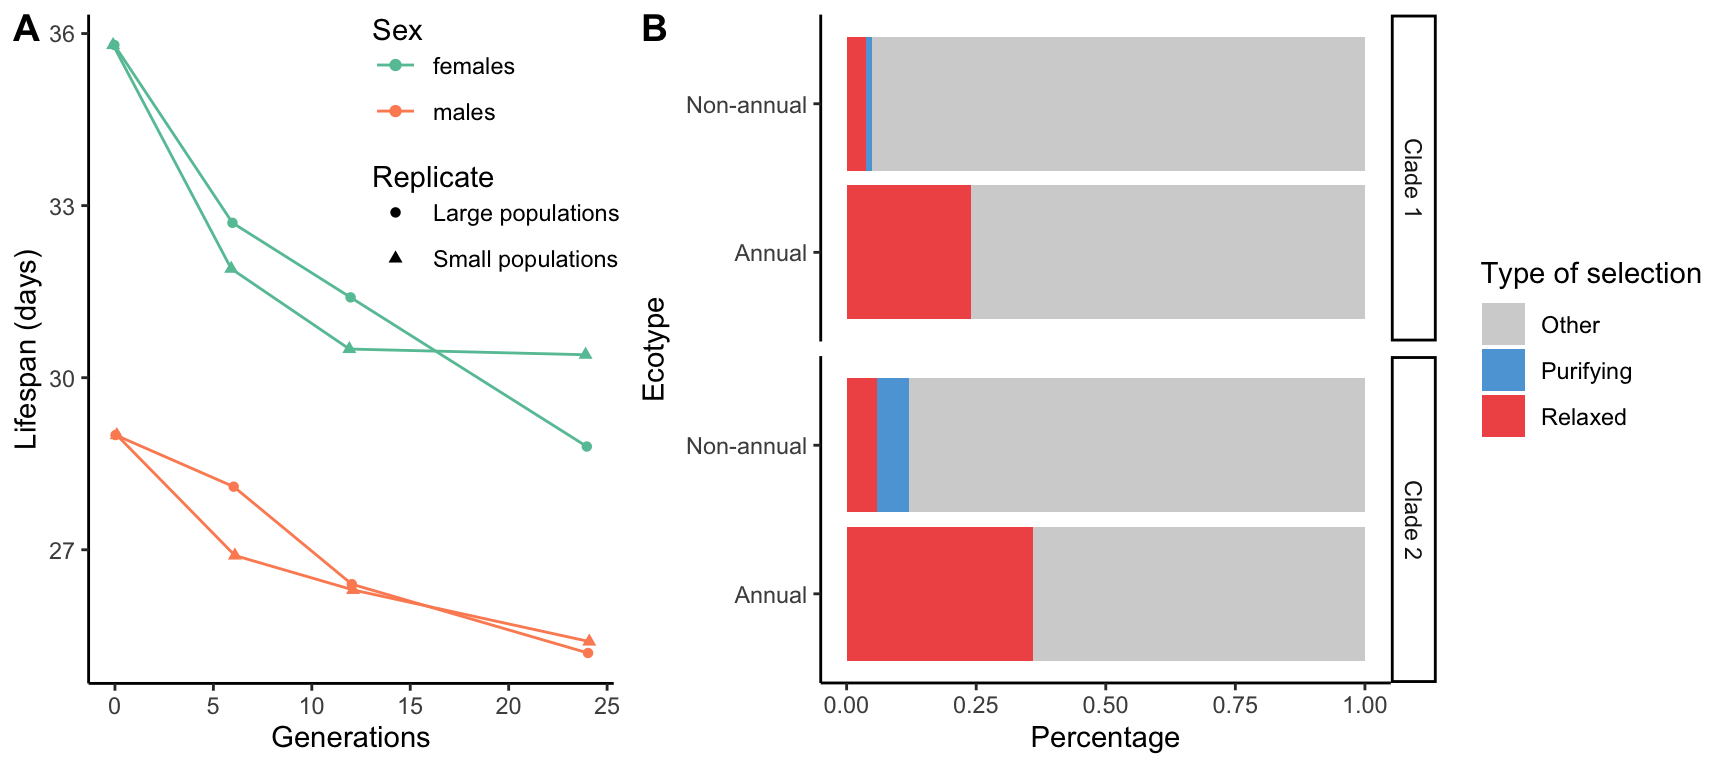 A. Evolution of lifespan in houseflies (*Musca domestica*) whose reproductive was limited to the first five days of their lives. Since deleterious mutations that unfold their effect after the reproductive period become selectively neutral, lifespan decreases as a consequence of the accumulation of deleterious mutations in the populations. [Data](data/12_del_mut.csv) form Reed and Bryant (2000). B. Patterns of genome evolution in annual killifishes and their non-annual relatives. Annual killifish exhibit much stronger signatures of relaxed selection characteristic for mutation accumulation. Note that clade 1 consists of *Callopanchax* (annual) and *Scriotaphyosemion* (non-annual); clade 2 of *Nothobranchius* (annual) and *Aphyosemion* (non-annual). [Data](data/12_killifish.csv) form Cui et al. (2019).